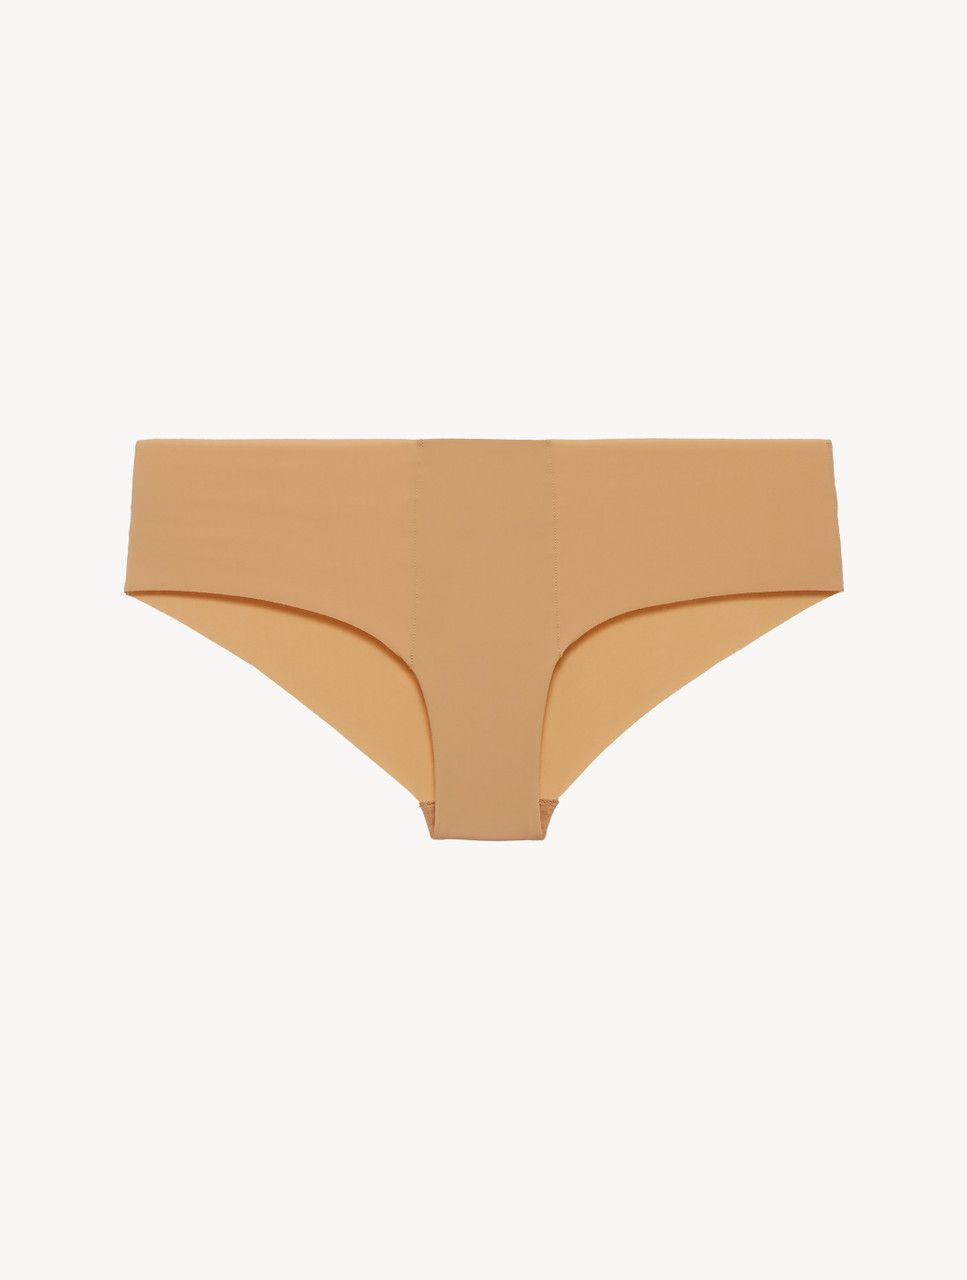 Subscription - Women's Hipster Briefs - Various Colours – British